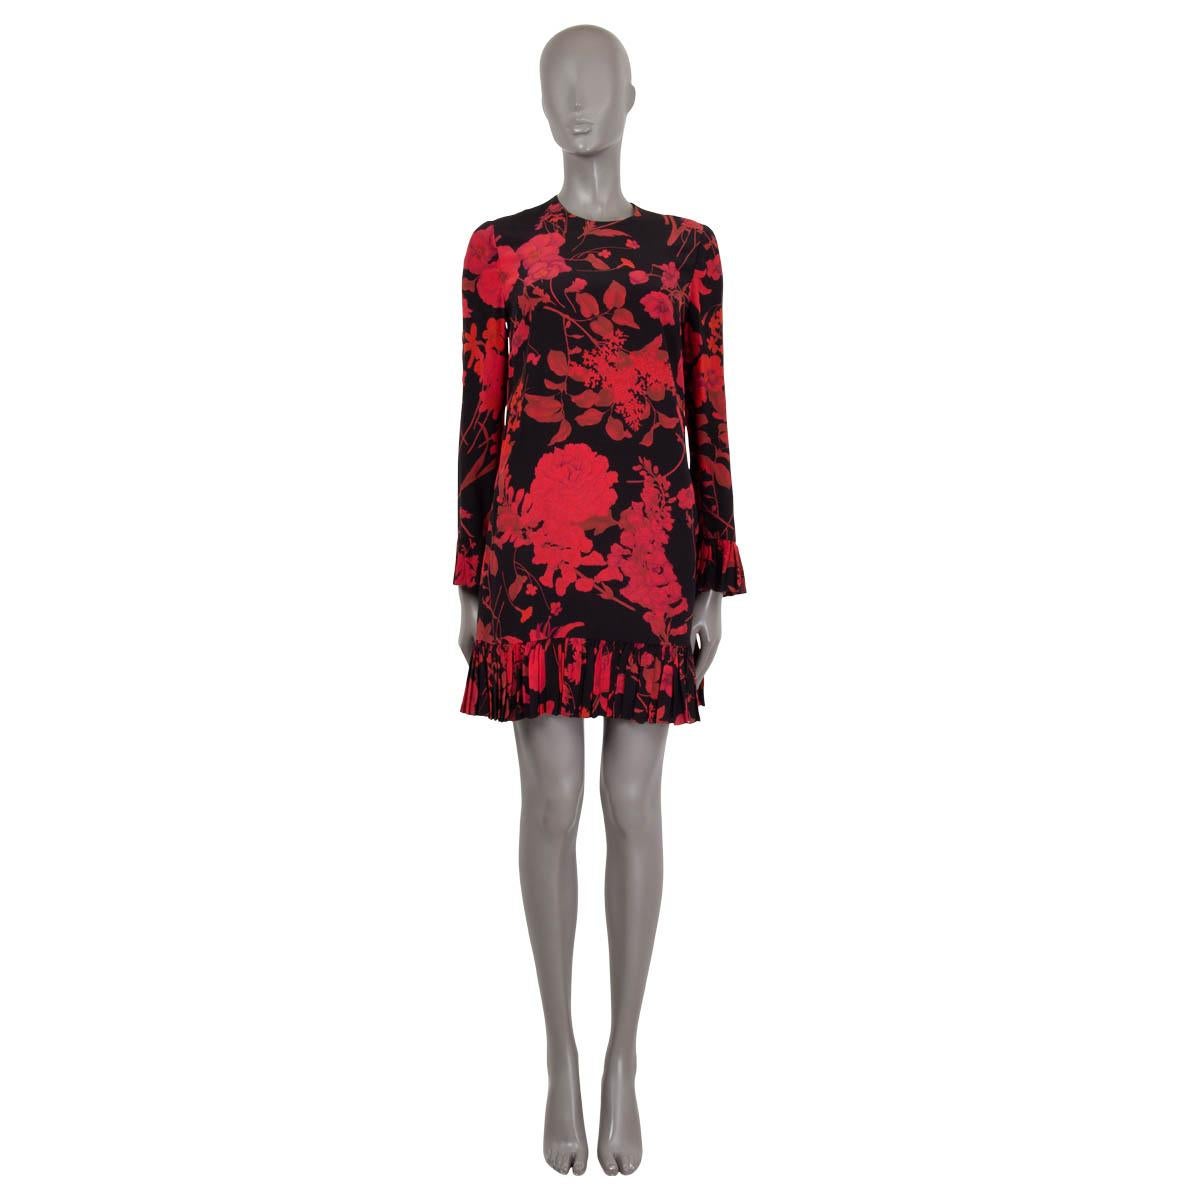 100% authentic Valentino 3/4 sleeve shift dress in red and black floral print silk crepe de chine (100%). Opens with a concealed zipper at the back. The design features a round neck, pleated hem and cuffs and comes with slit side pockets. Has been